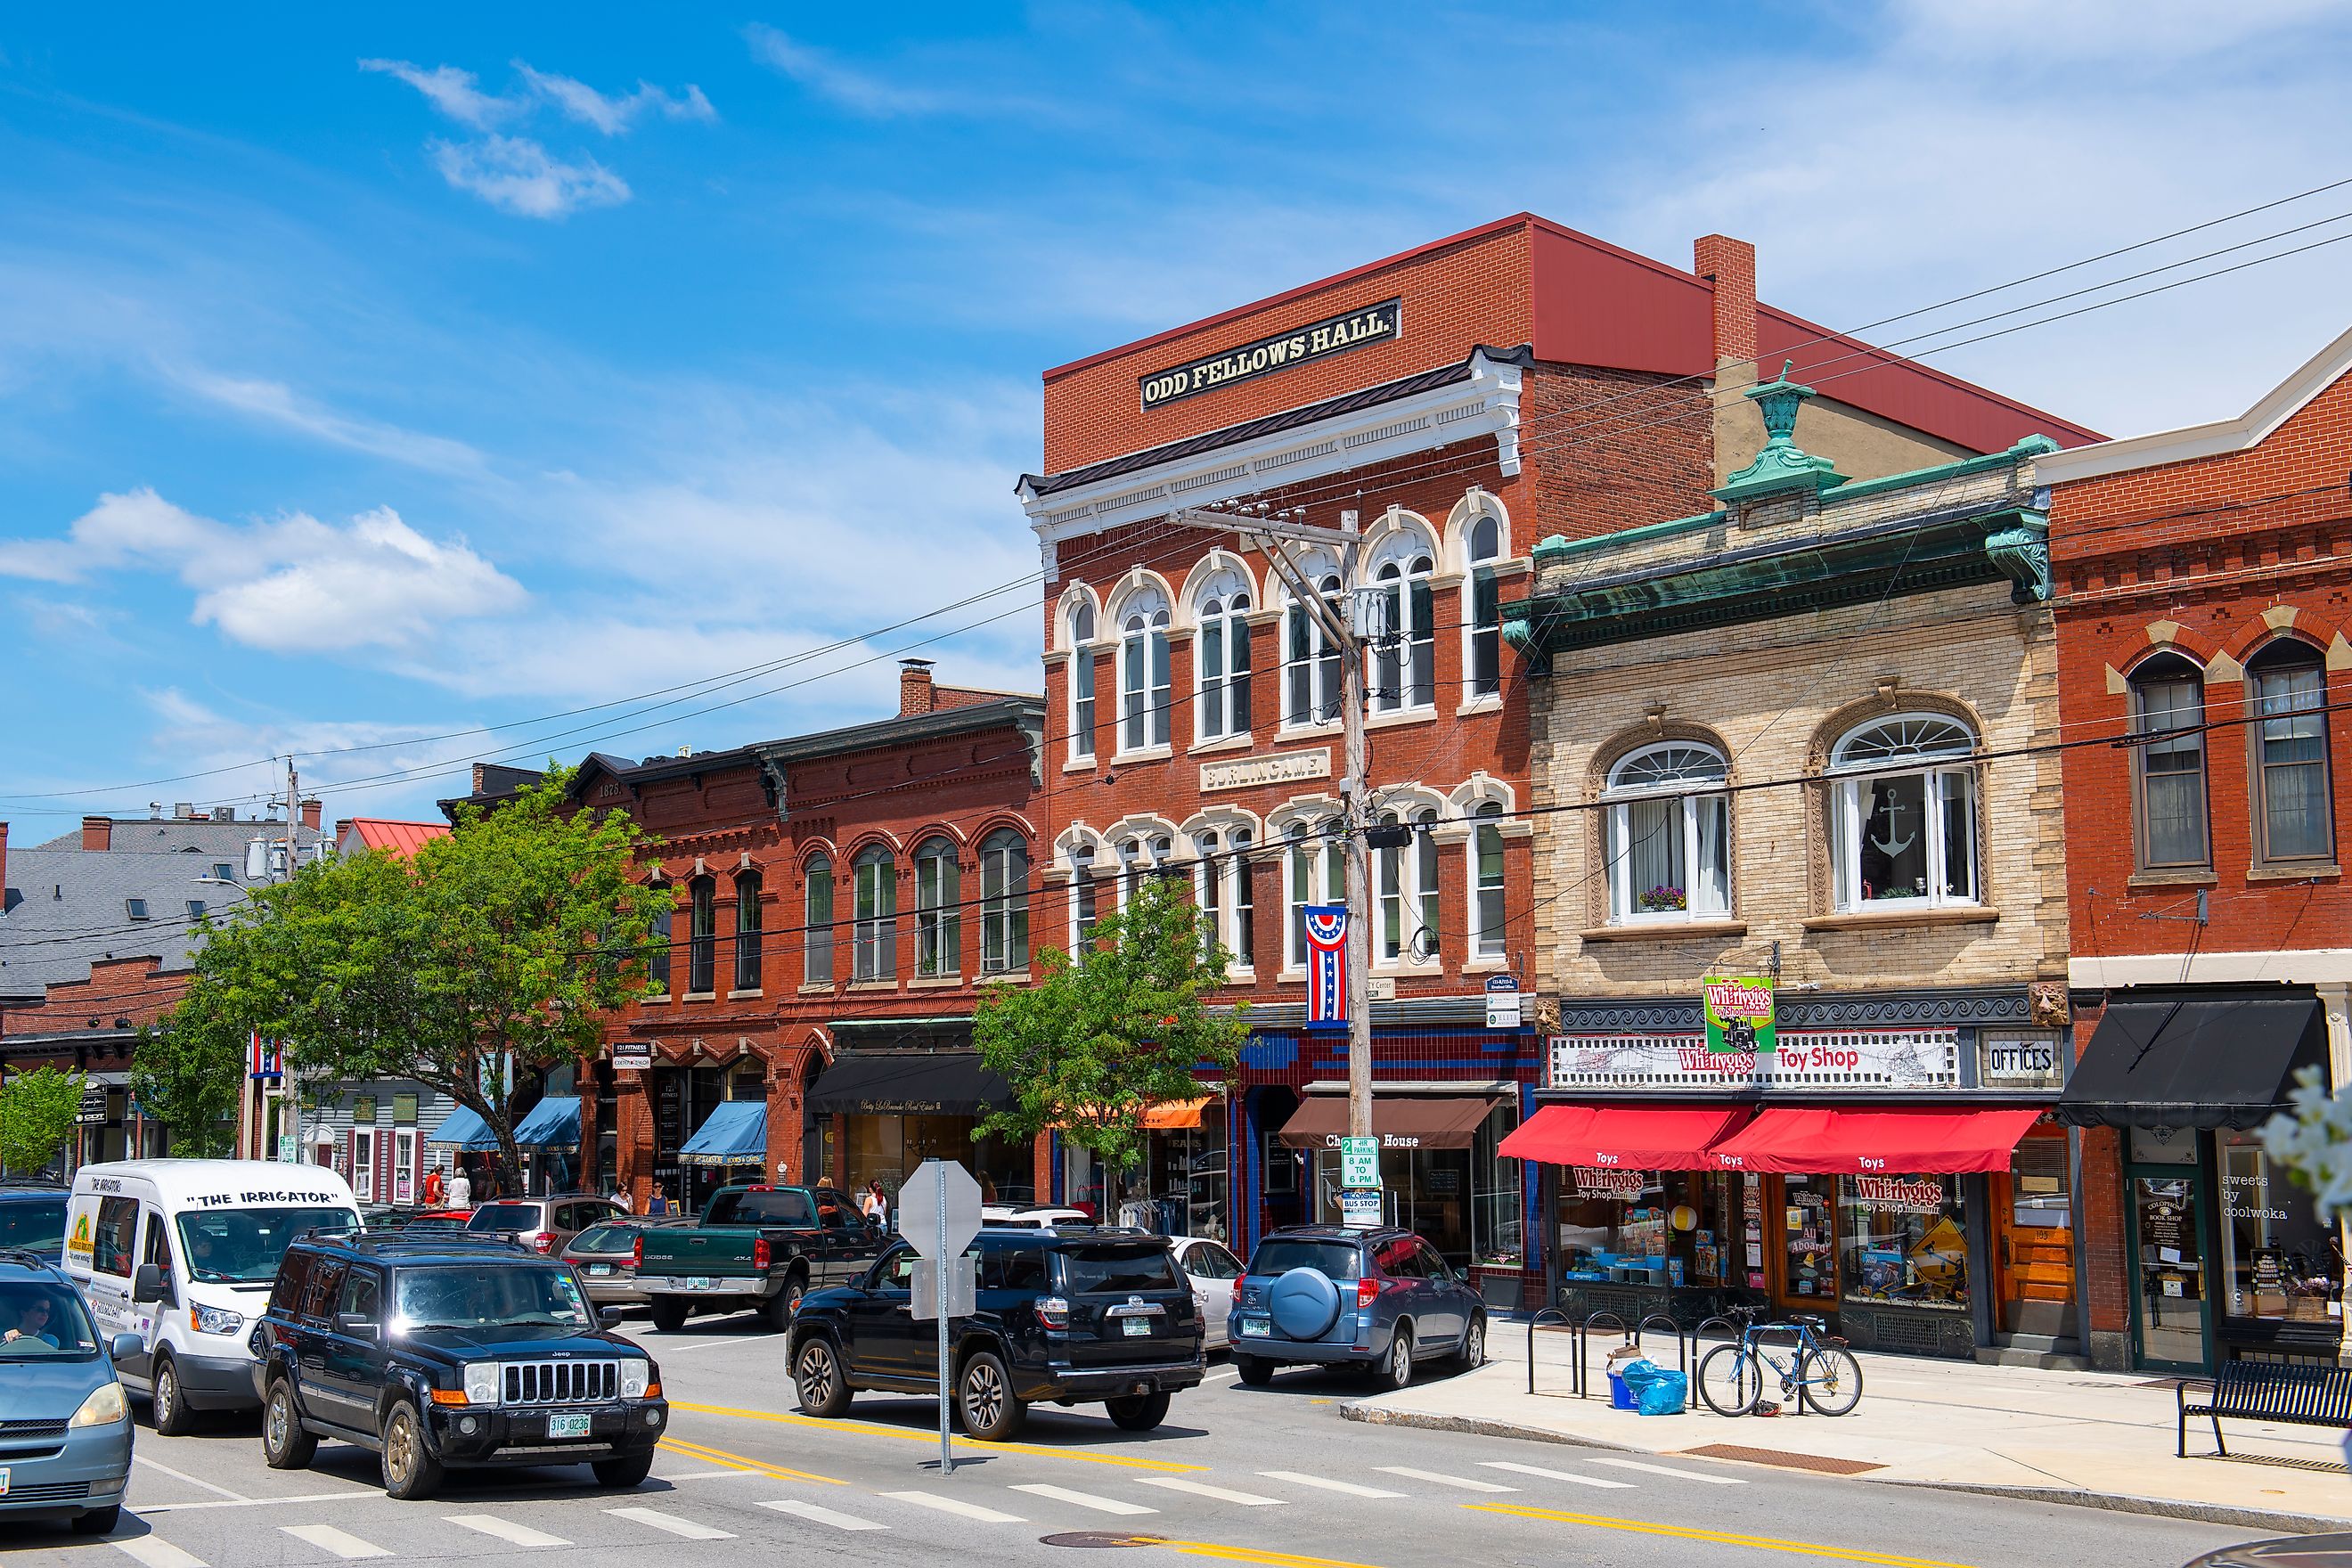 Odd Fellows Hall in the historic area of Exeter, New Hampshire. Editorial credit: Wangkun Jia / Shutterstock.com